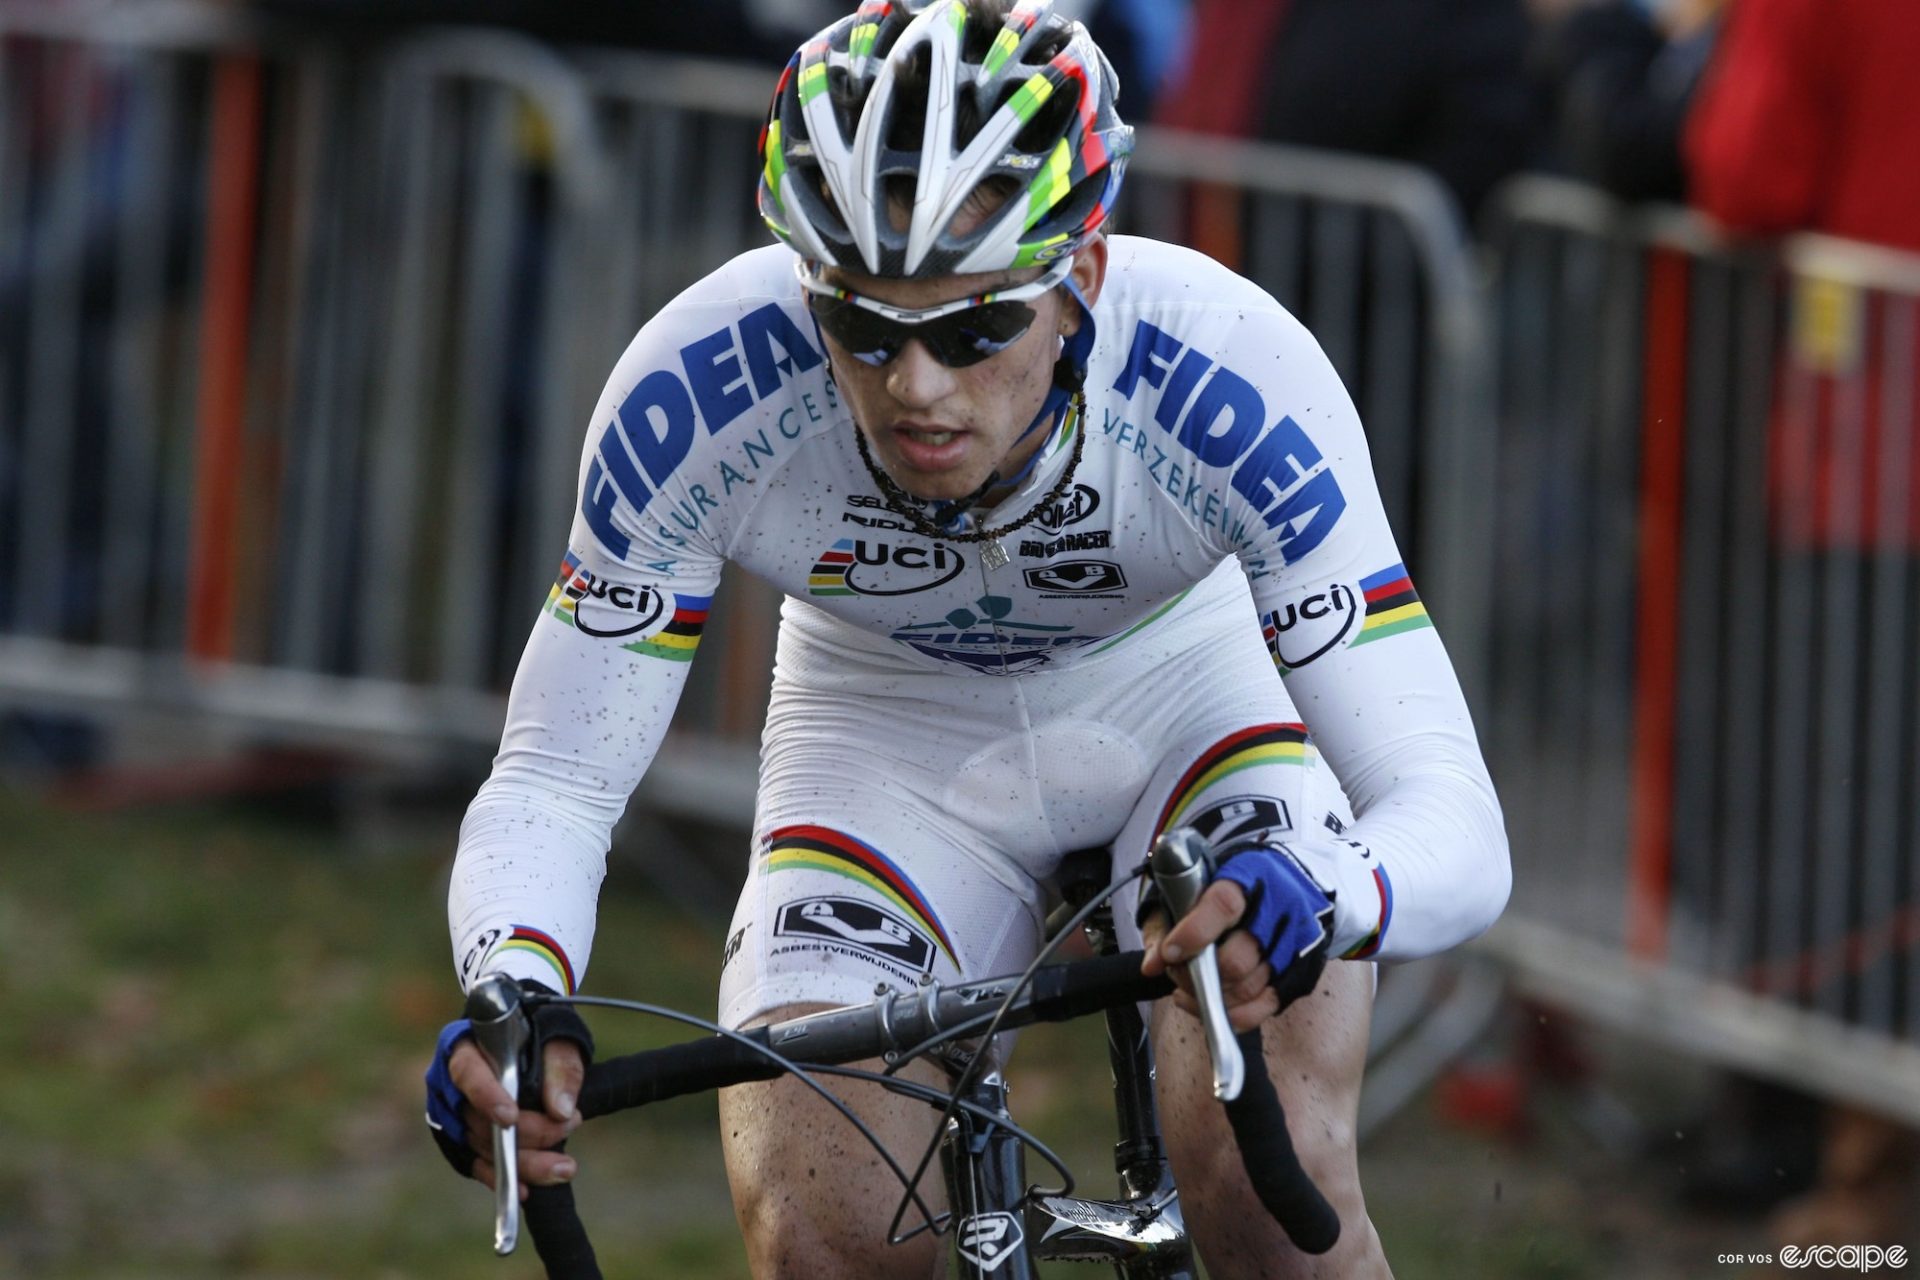 A young Zdeněk Štybar in the rainbow bands of the U23 world champ.